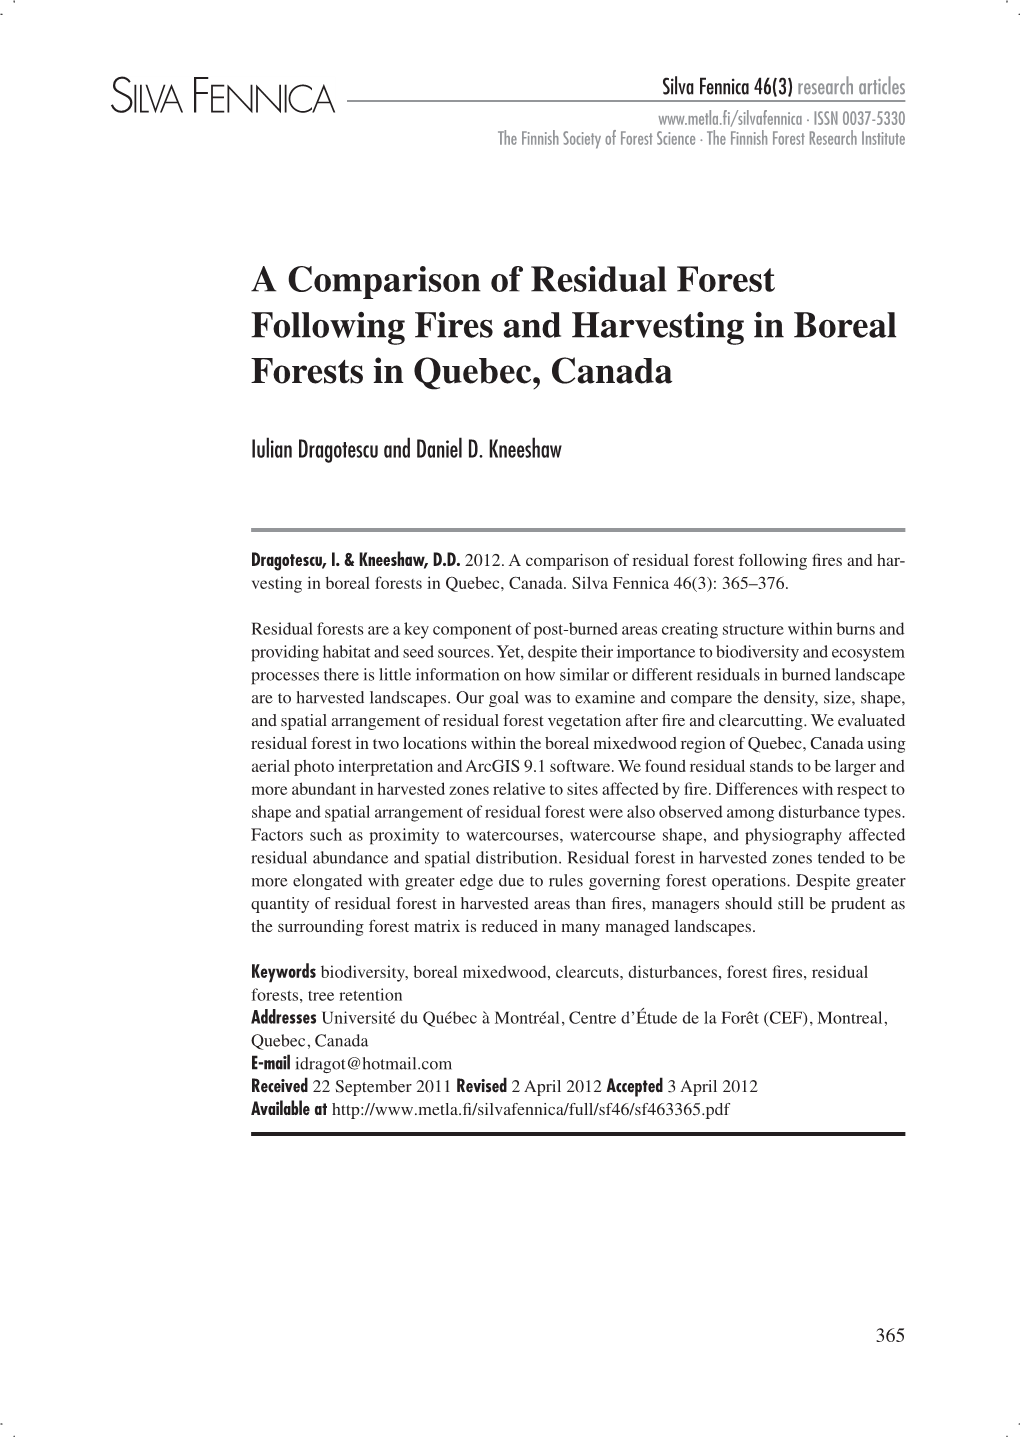 A Comparison of Residual Forest Following Fires and Harvesting in Boreal Forests in Quebec, Canada